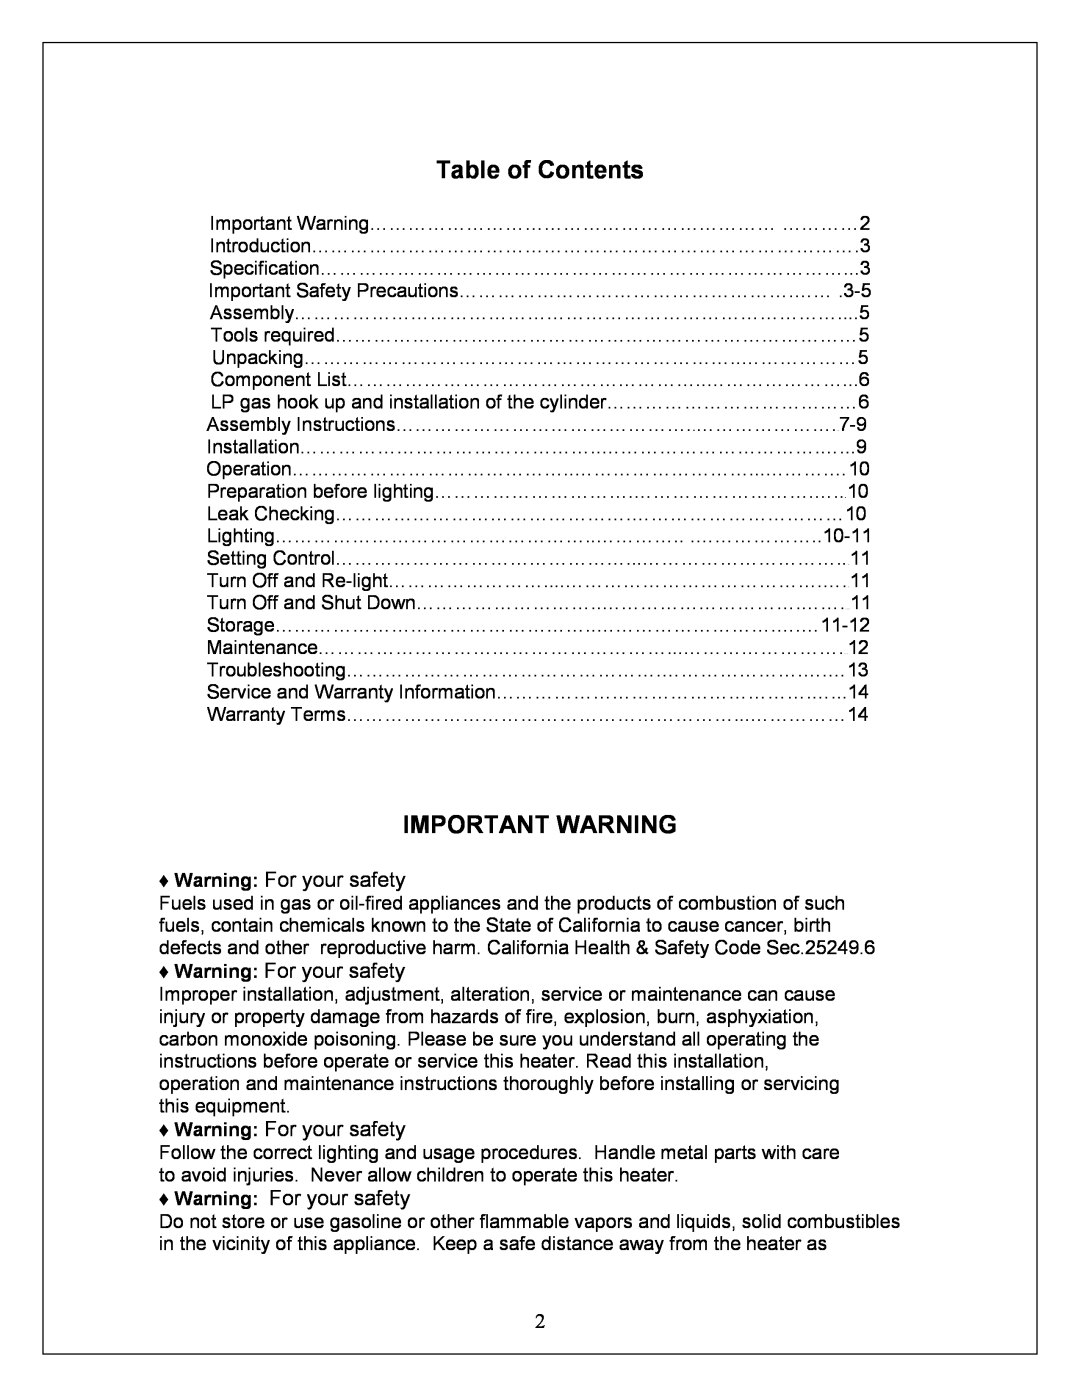 NewAir APH-4000PV owner manual Table of Contents, Important Warning, Warning For your safety 